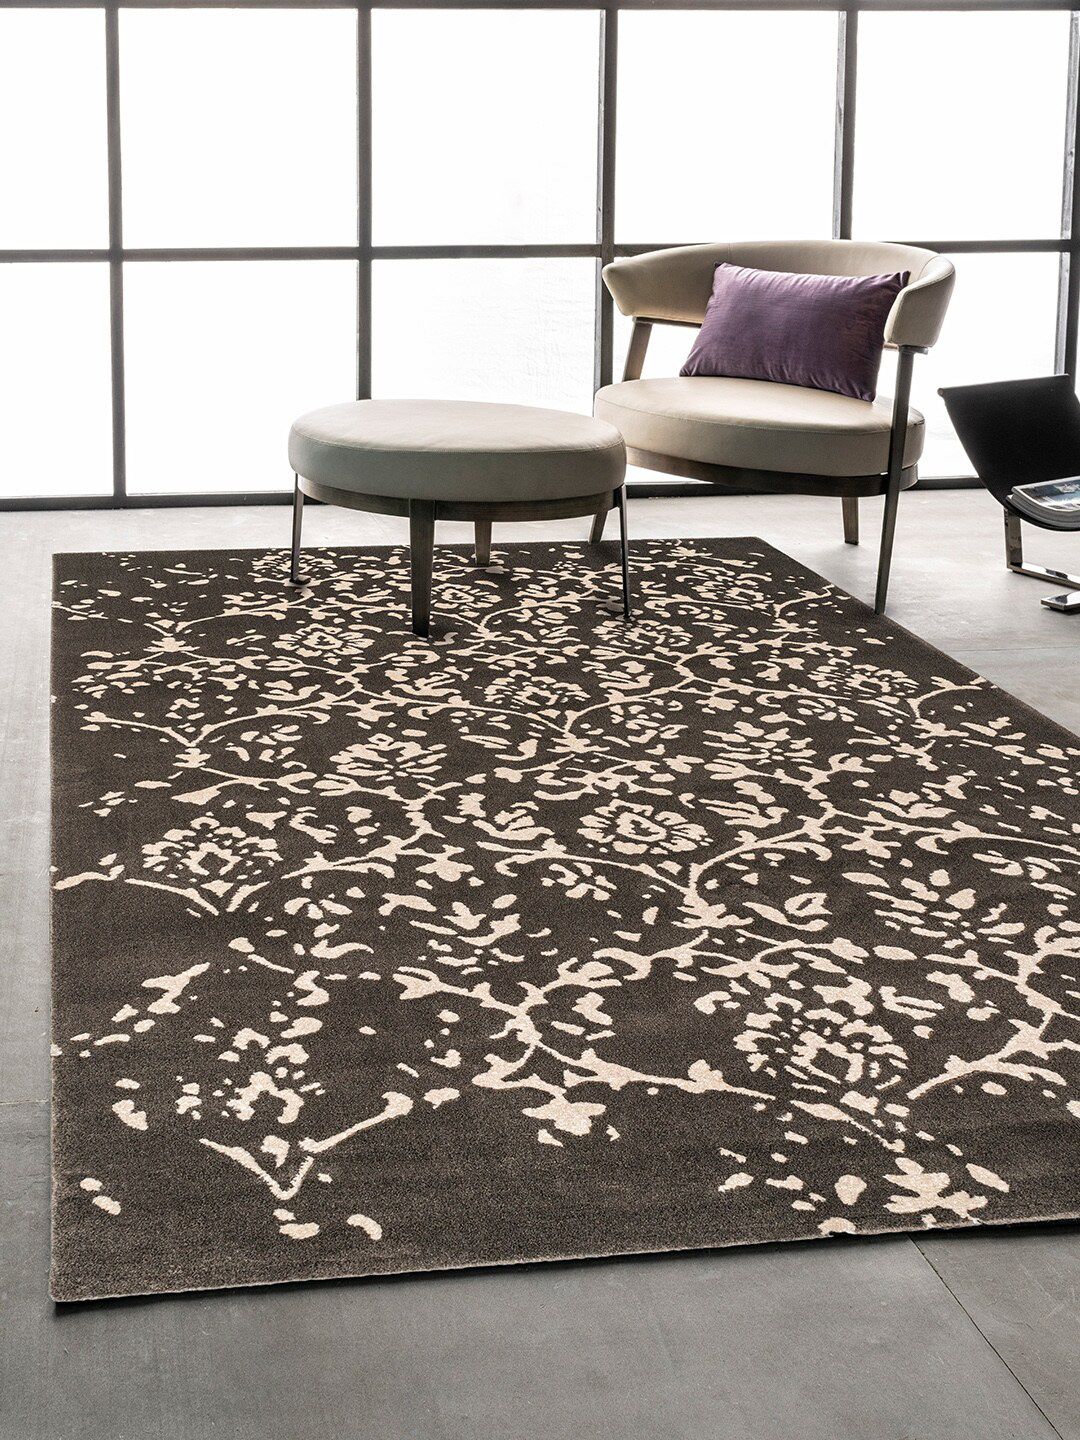 DDecor Charcoal Grey & Pink Floral Printed Heavy Carpet Price in India